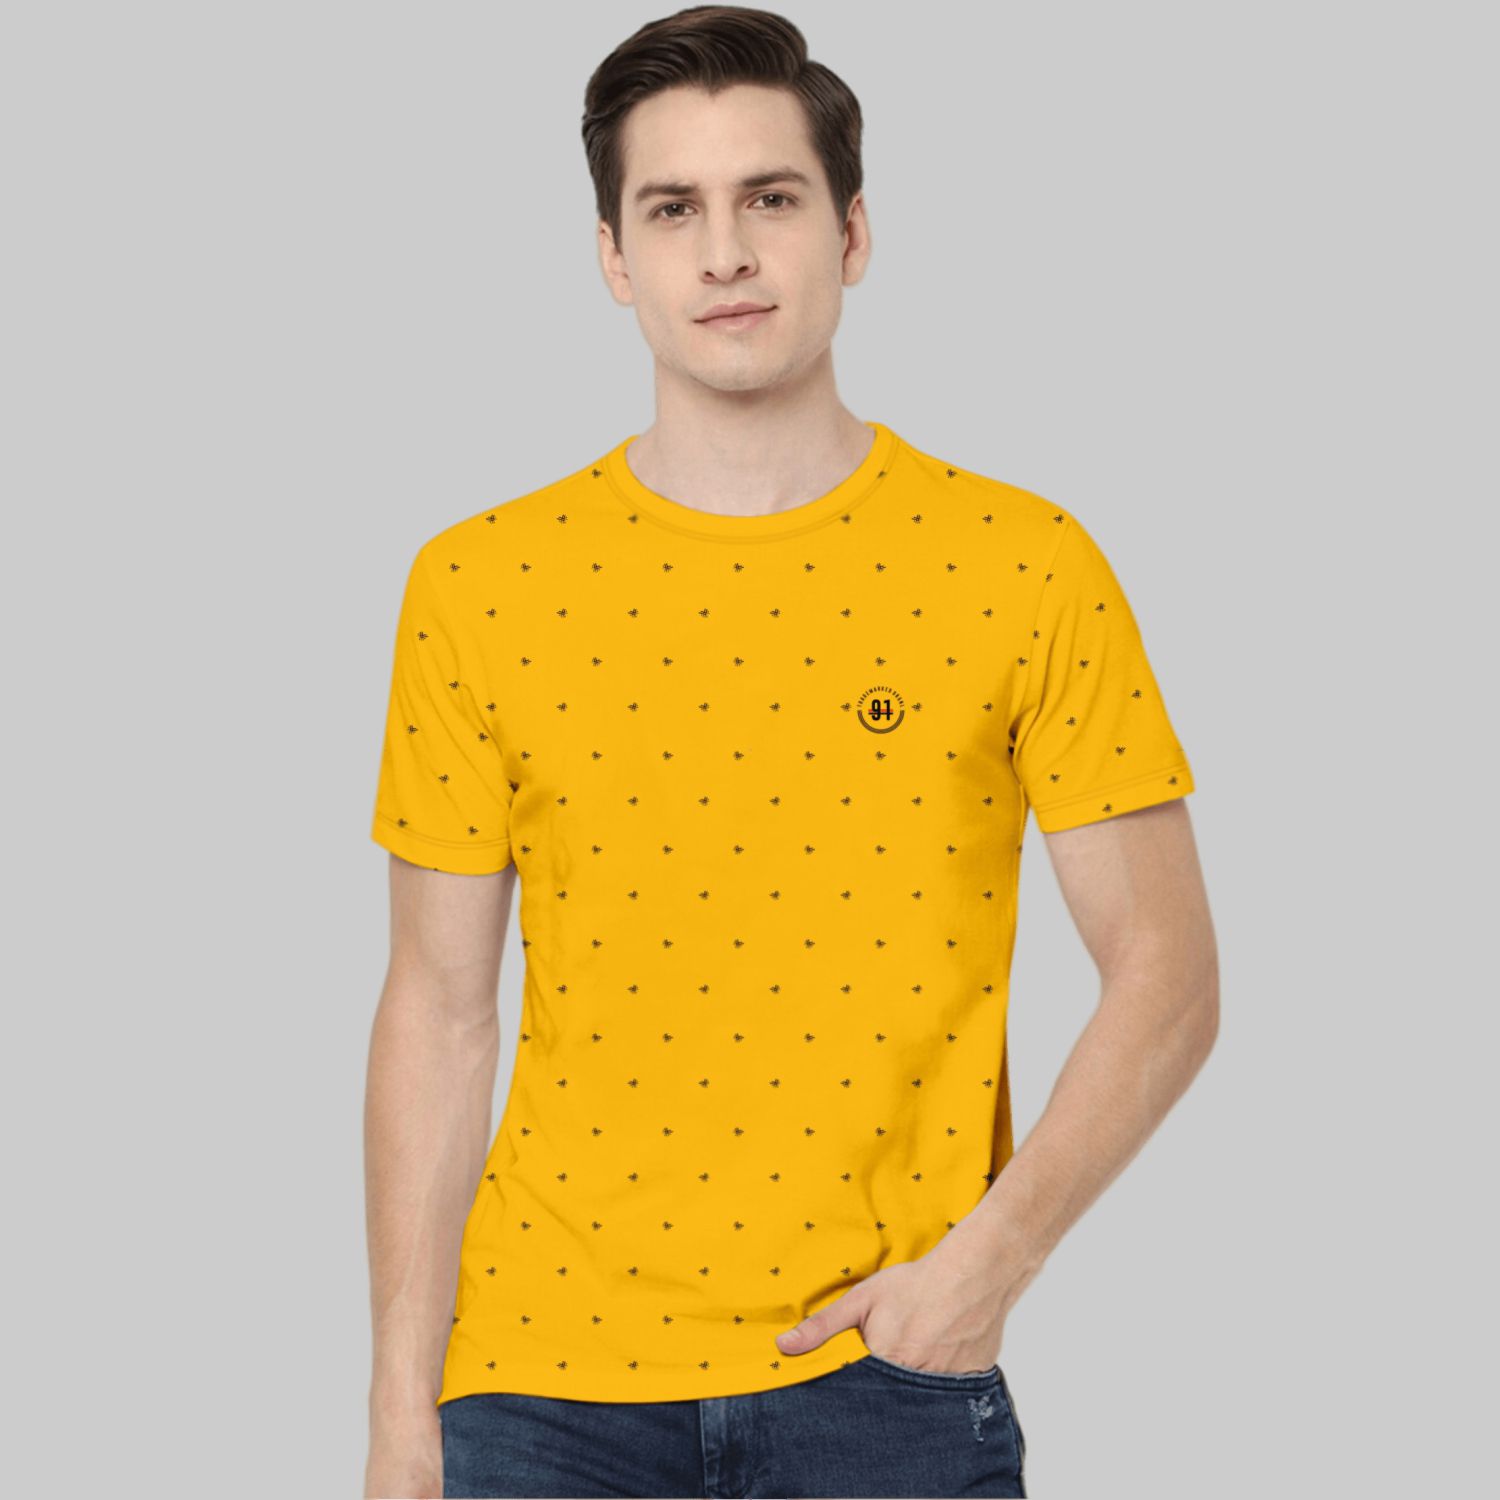     			TAB91 - Yellow Cotton Blend Slim Fit Men's T-Shirt ( Pack of 1 )